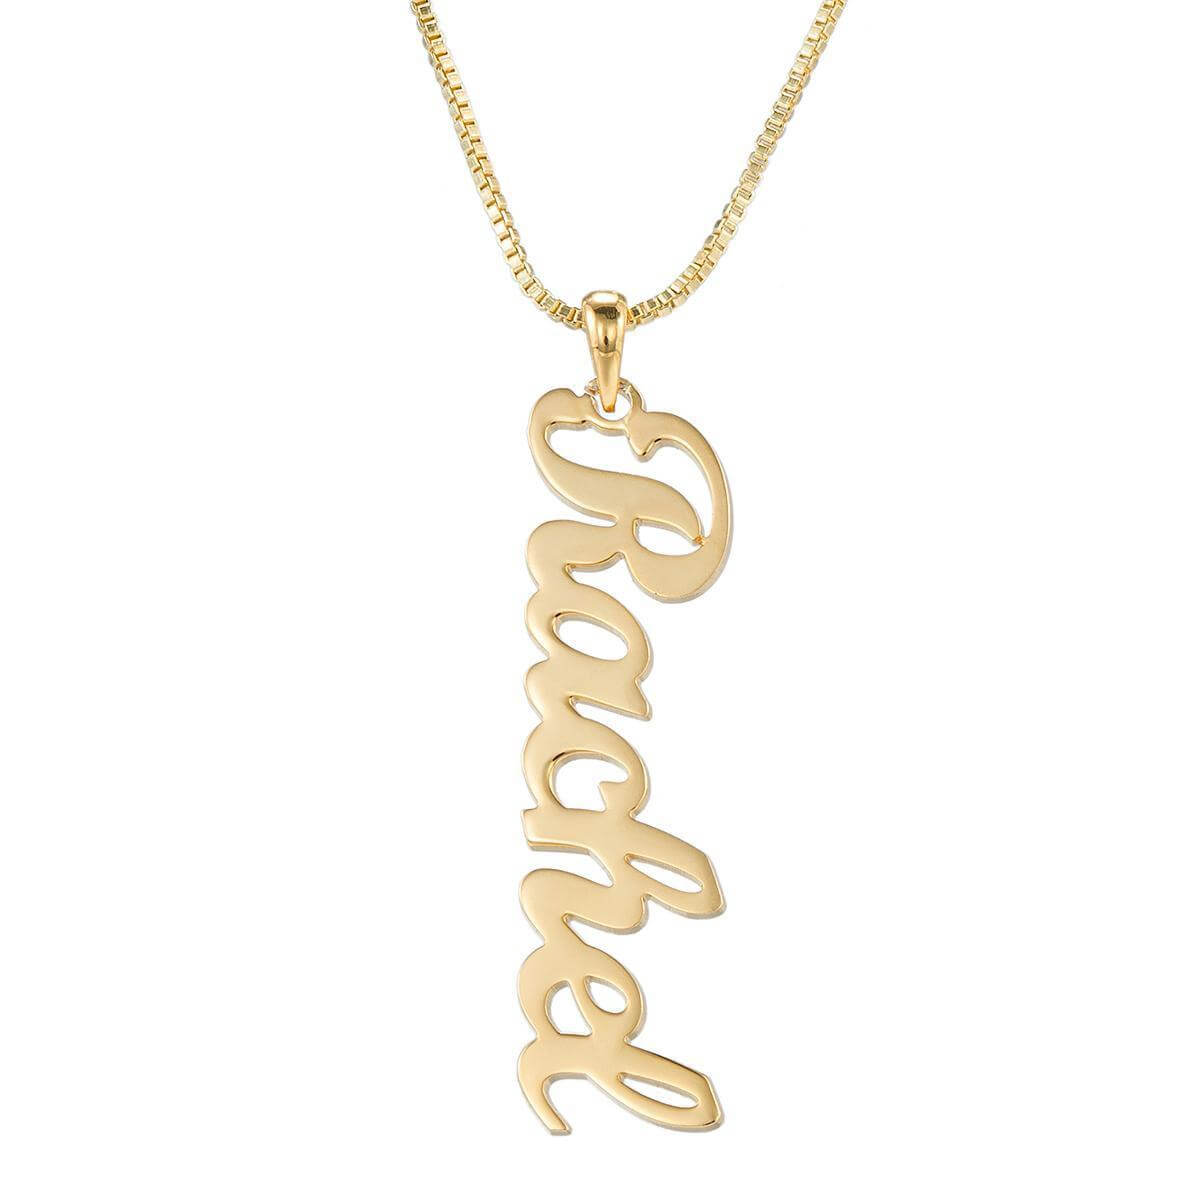 Exquisite Vertical Personalized Custom Name Necklace